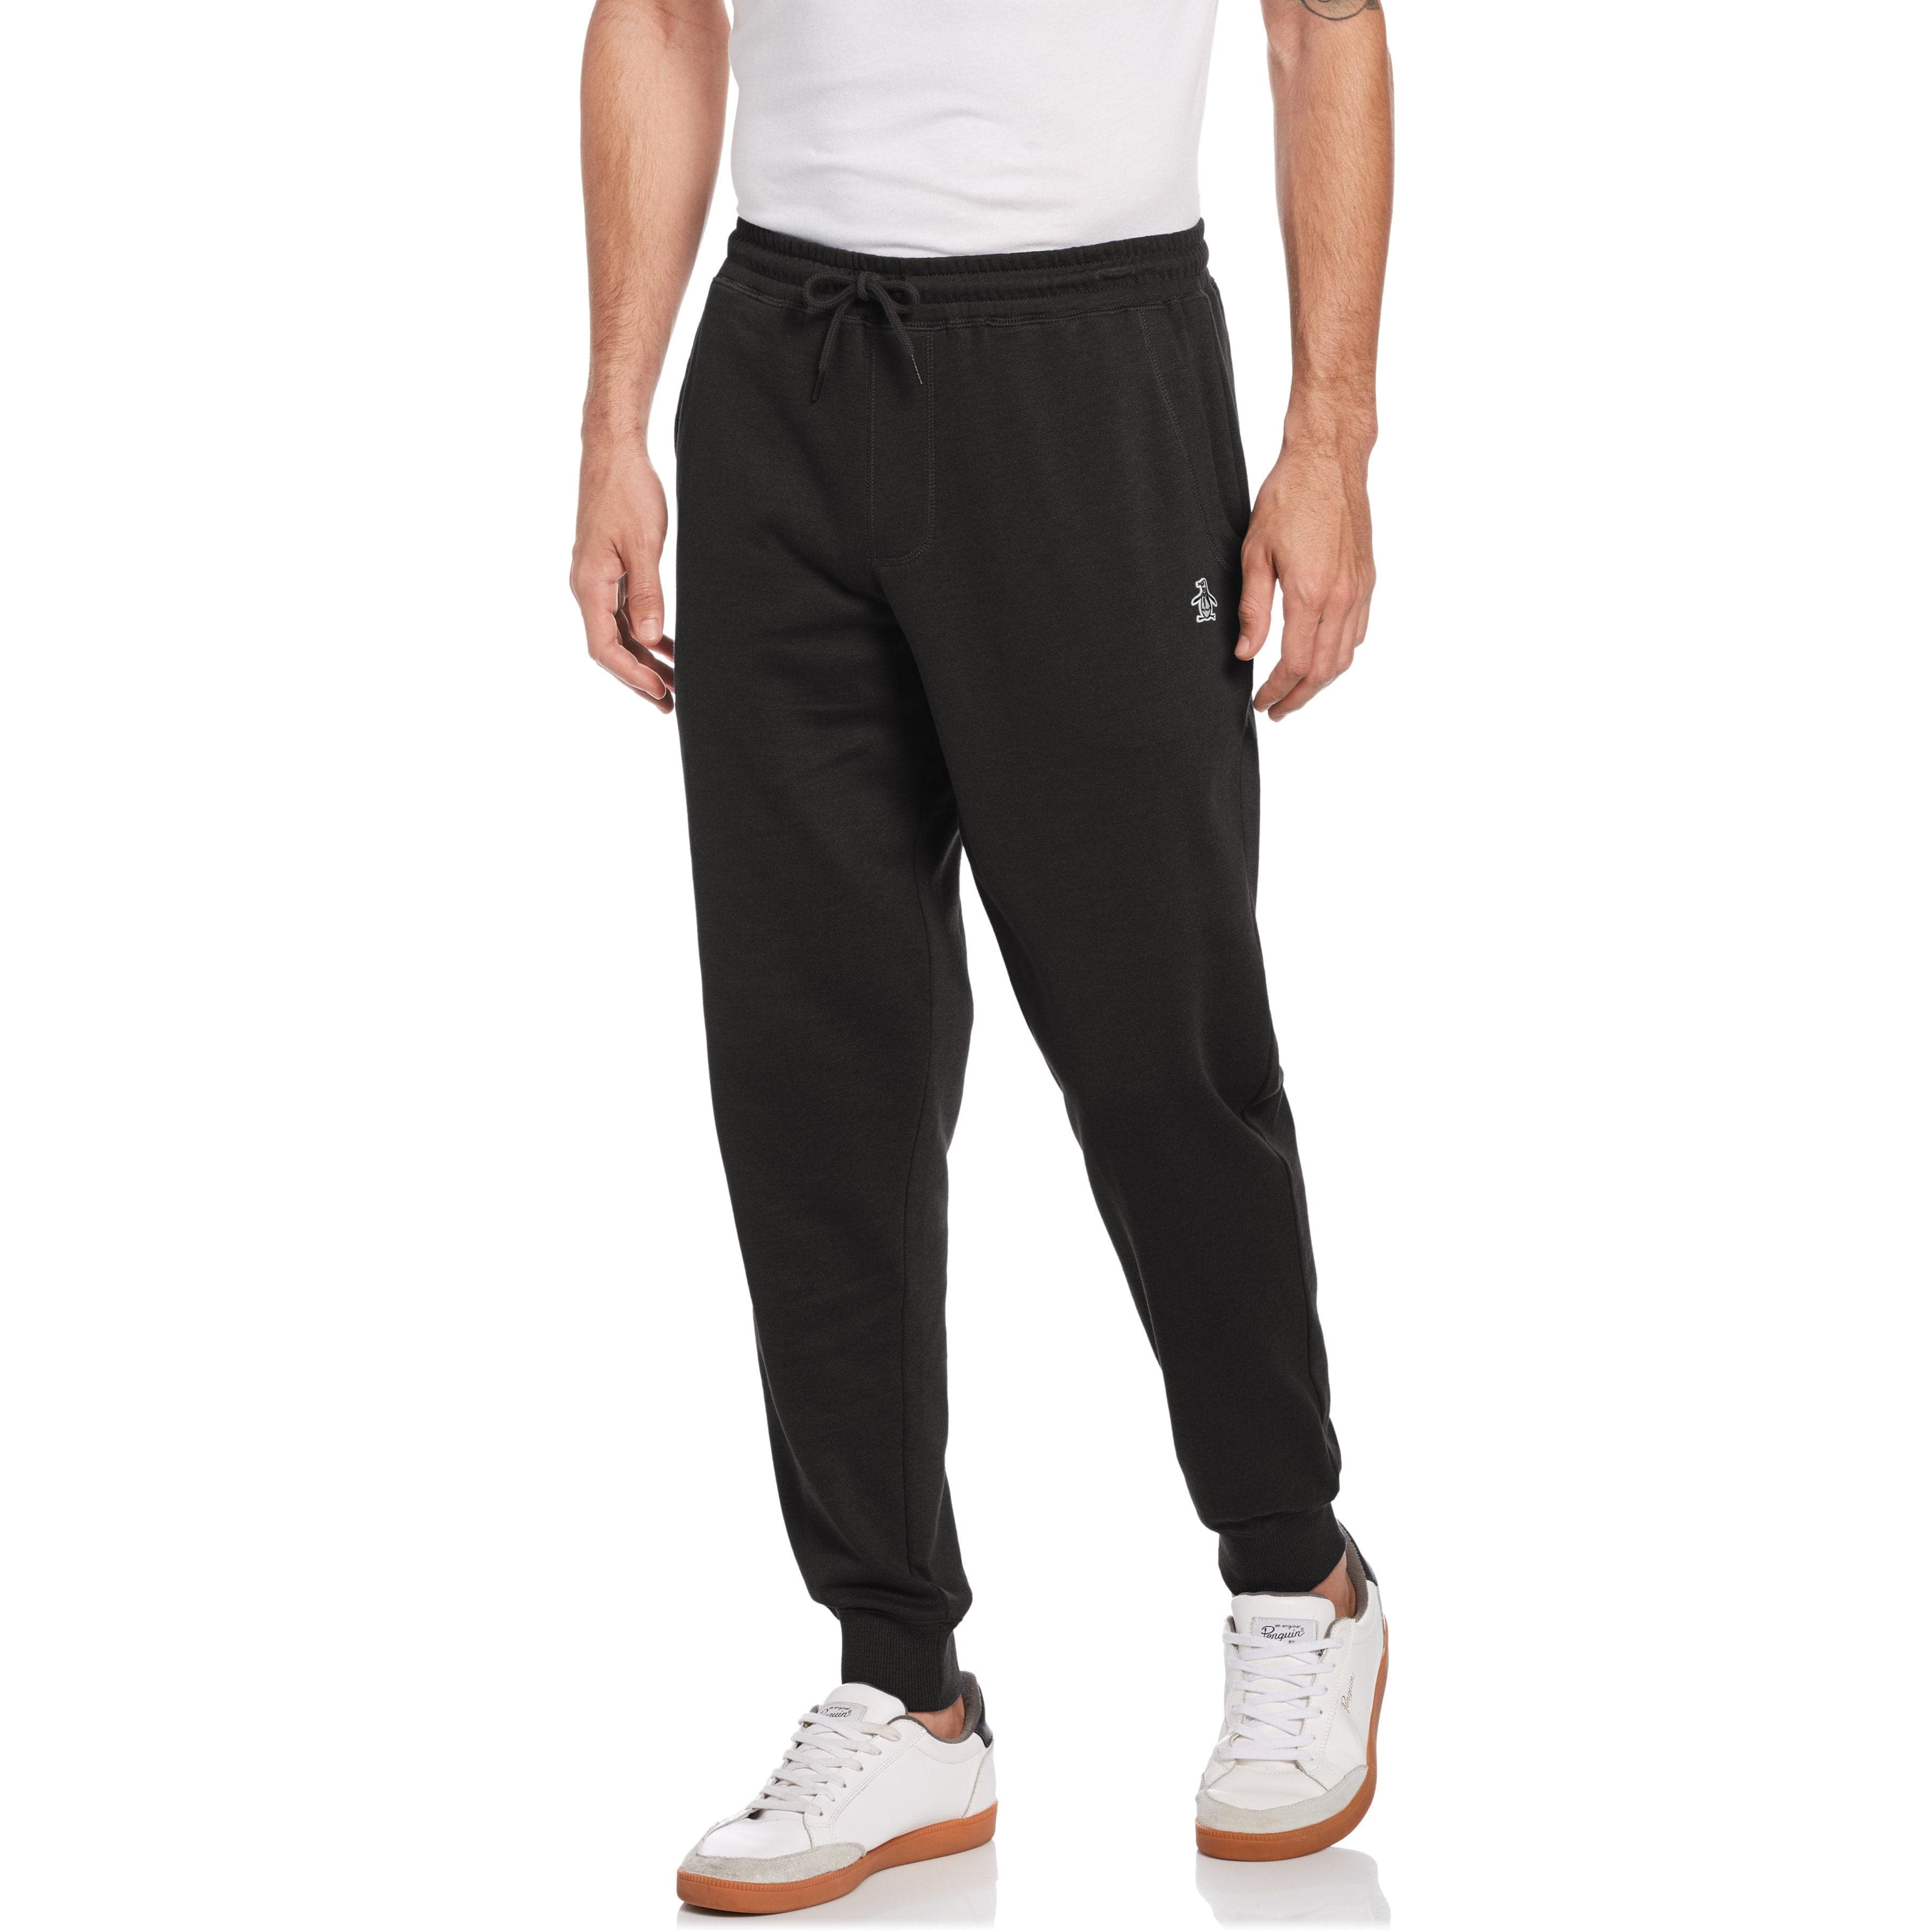 Up To 58% Off on Men's 2 Piece Jogger Fleece S